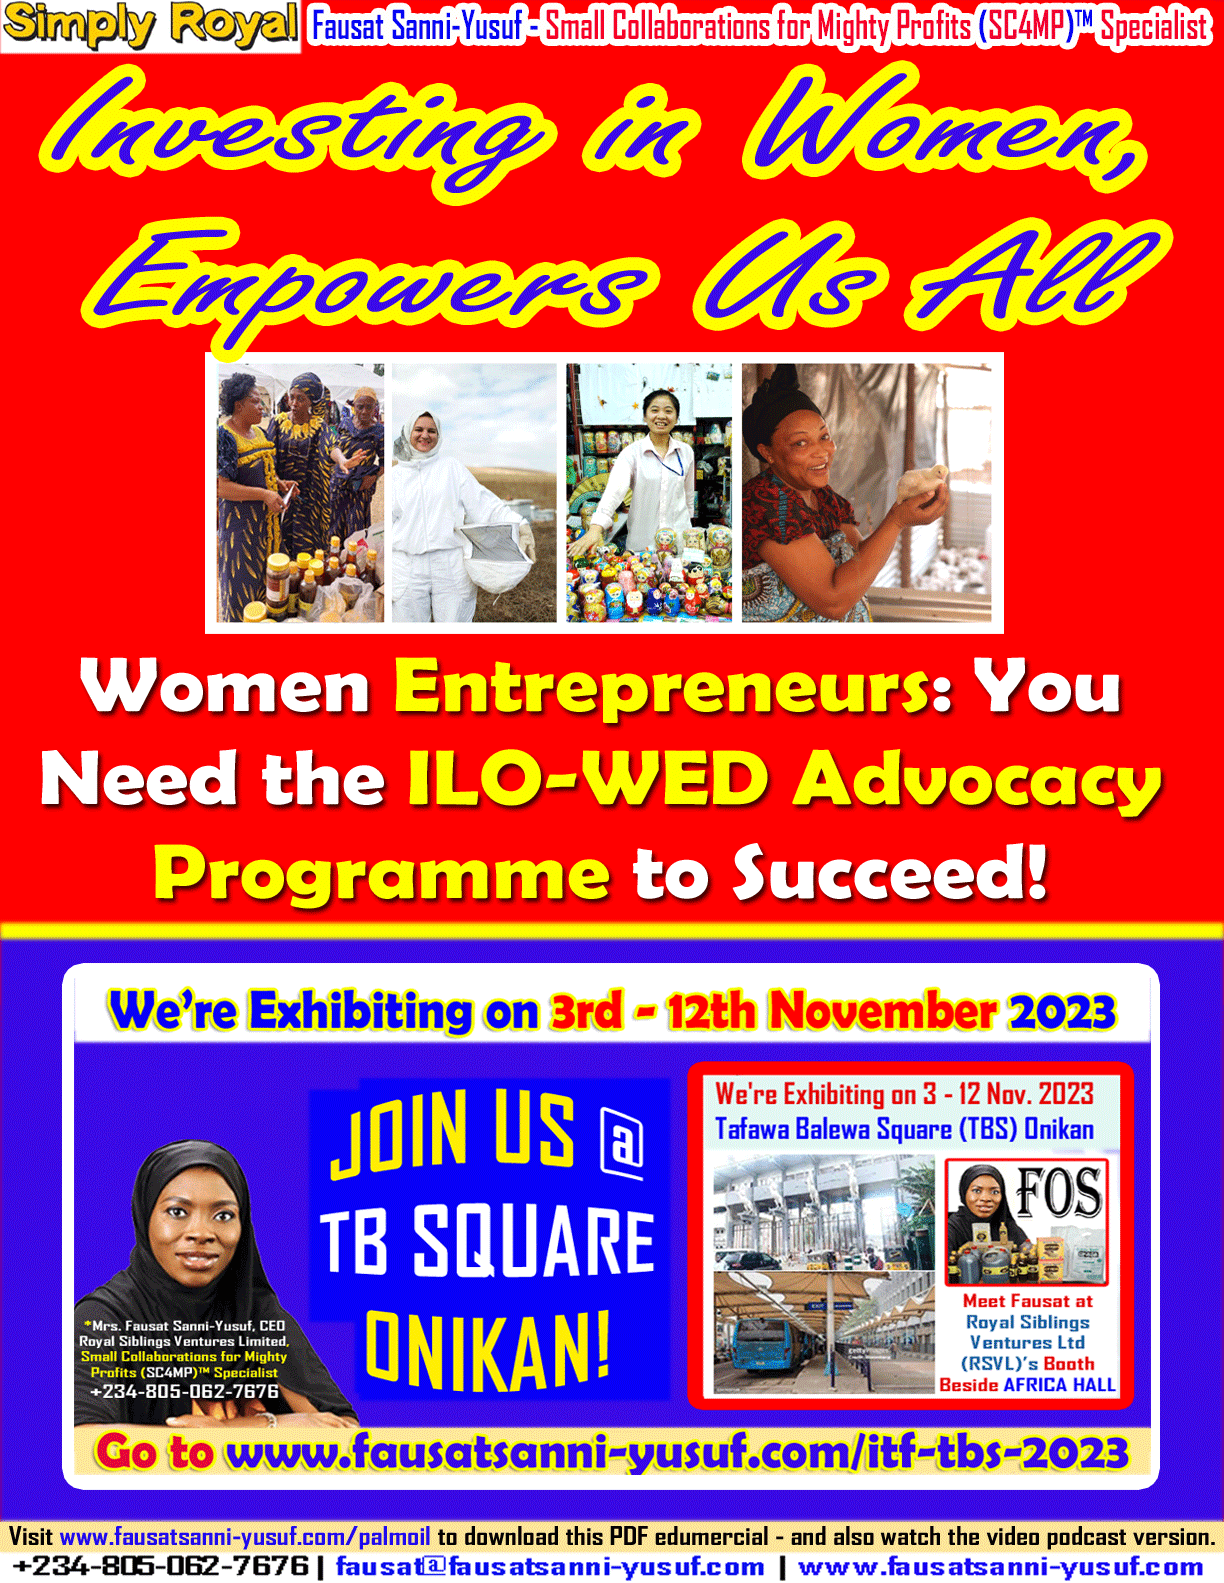 “Investing in Women, Empowers Us All”: Women Entrepreneurs, You Need the ILO-WED Advocacy Programme to Succeed! [PDF]